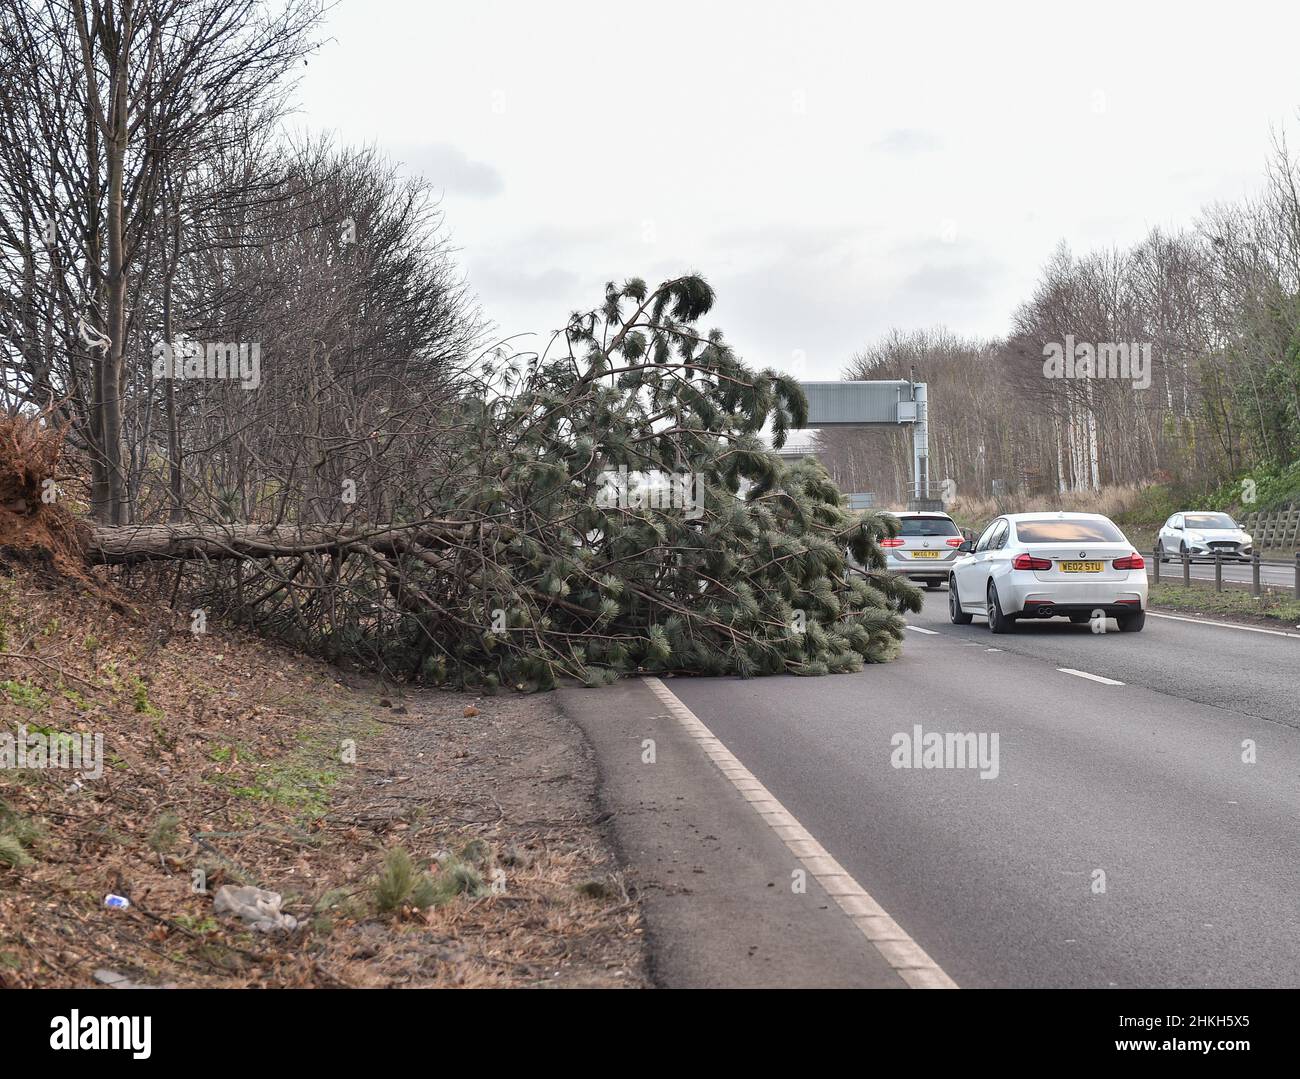 Storm Malik hit the UK, with dog walkers getting caught in sandstorms in Dunbar, East Lothian and drivers narrowly avoiding fallen trees on the main A1 road near Musselburgh, East Lothian. Stock Photo